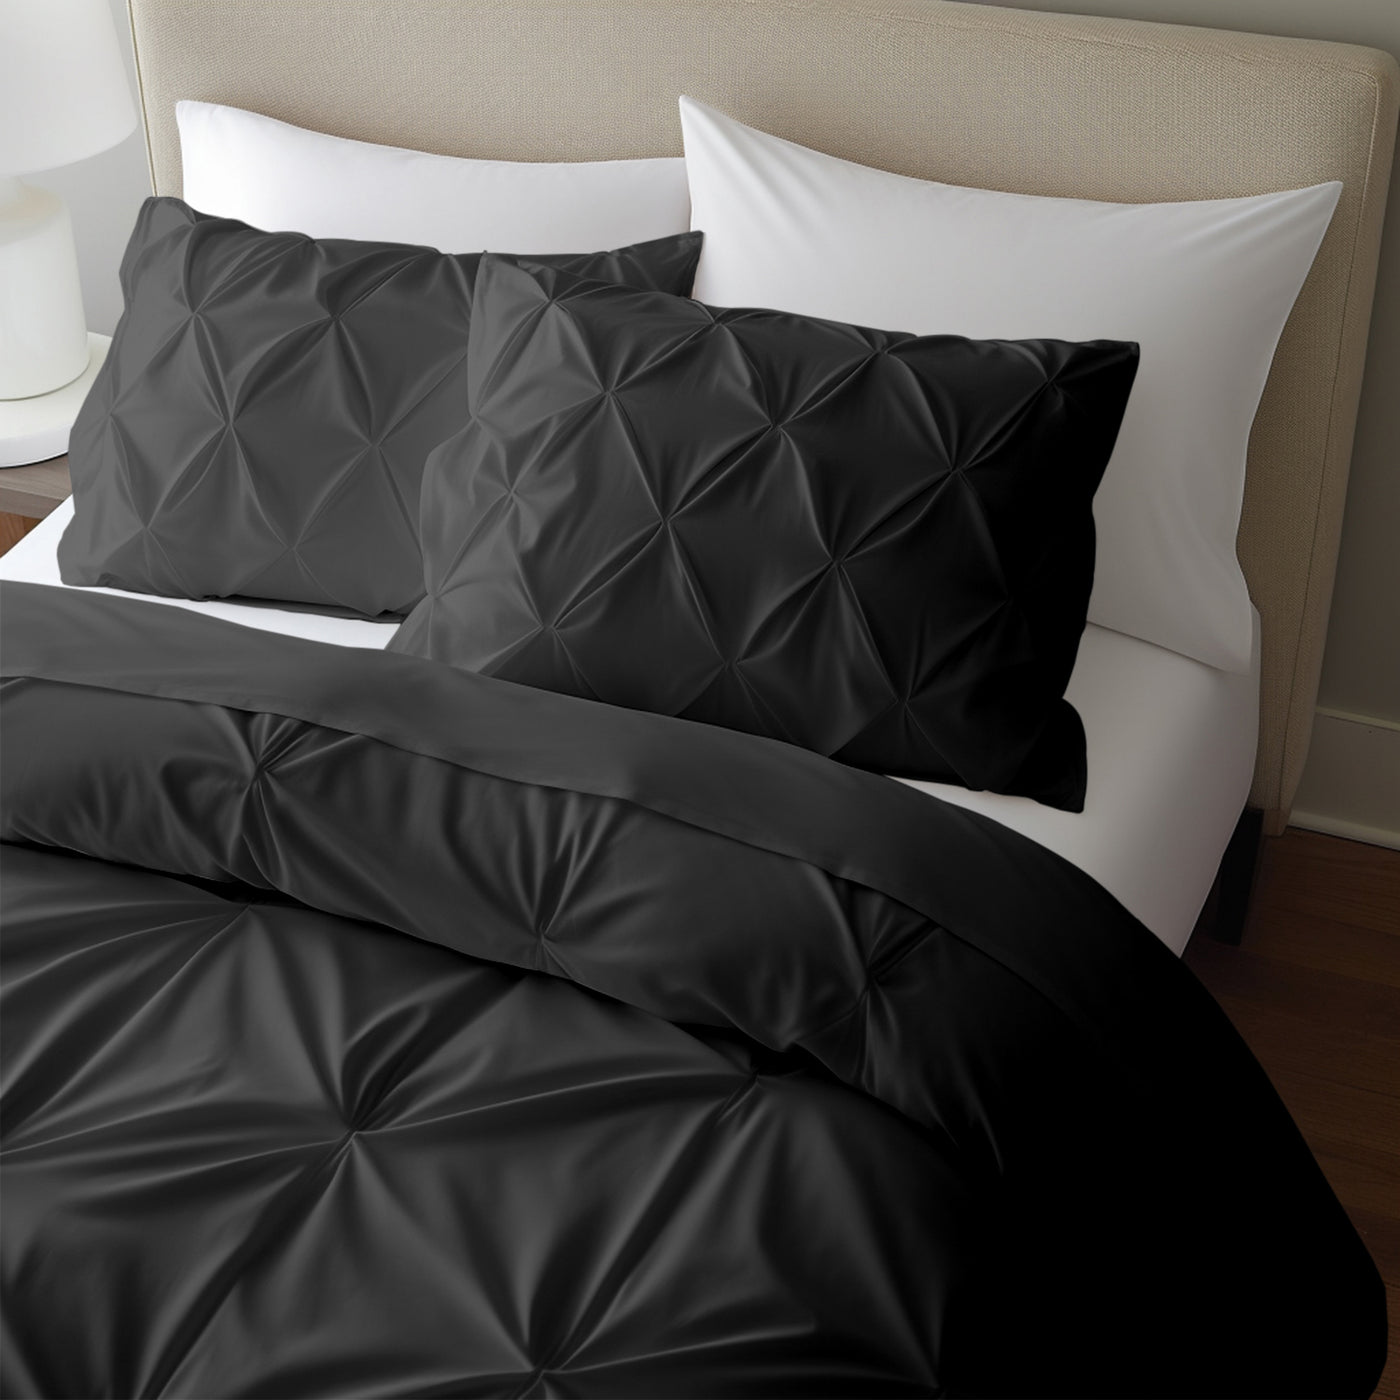 Pinch Pleated 3 Piece Duvet Cover Set 100% Egyptian Cotton 600 Thread Count - Dark Colors